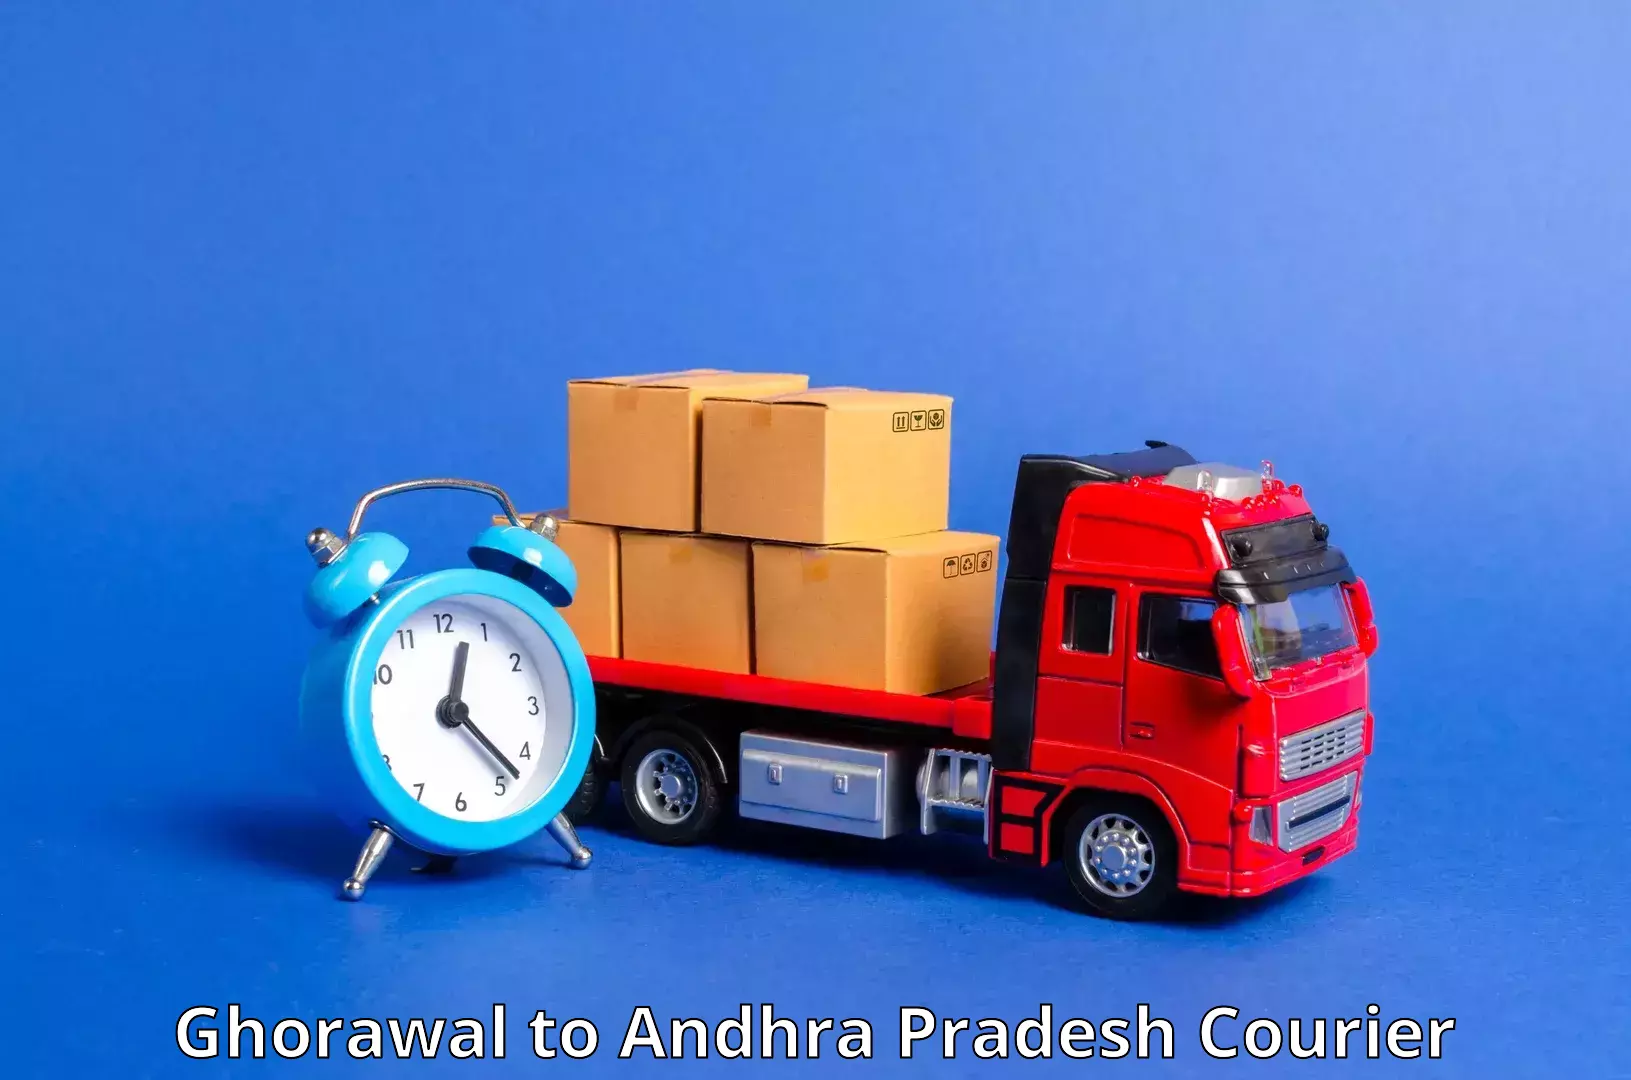 Same-day delivery solutions in Ghorawal to Tripuranthakam